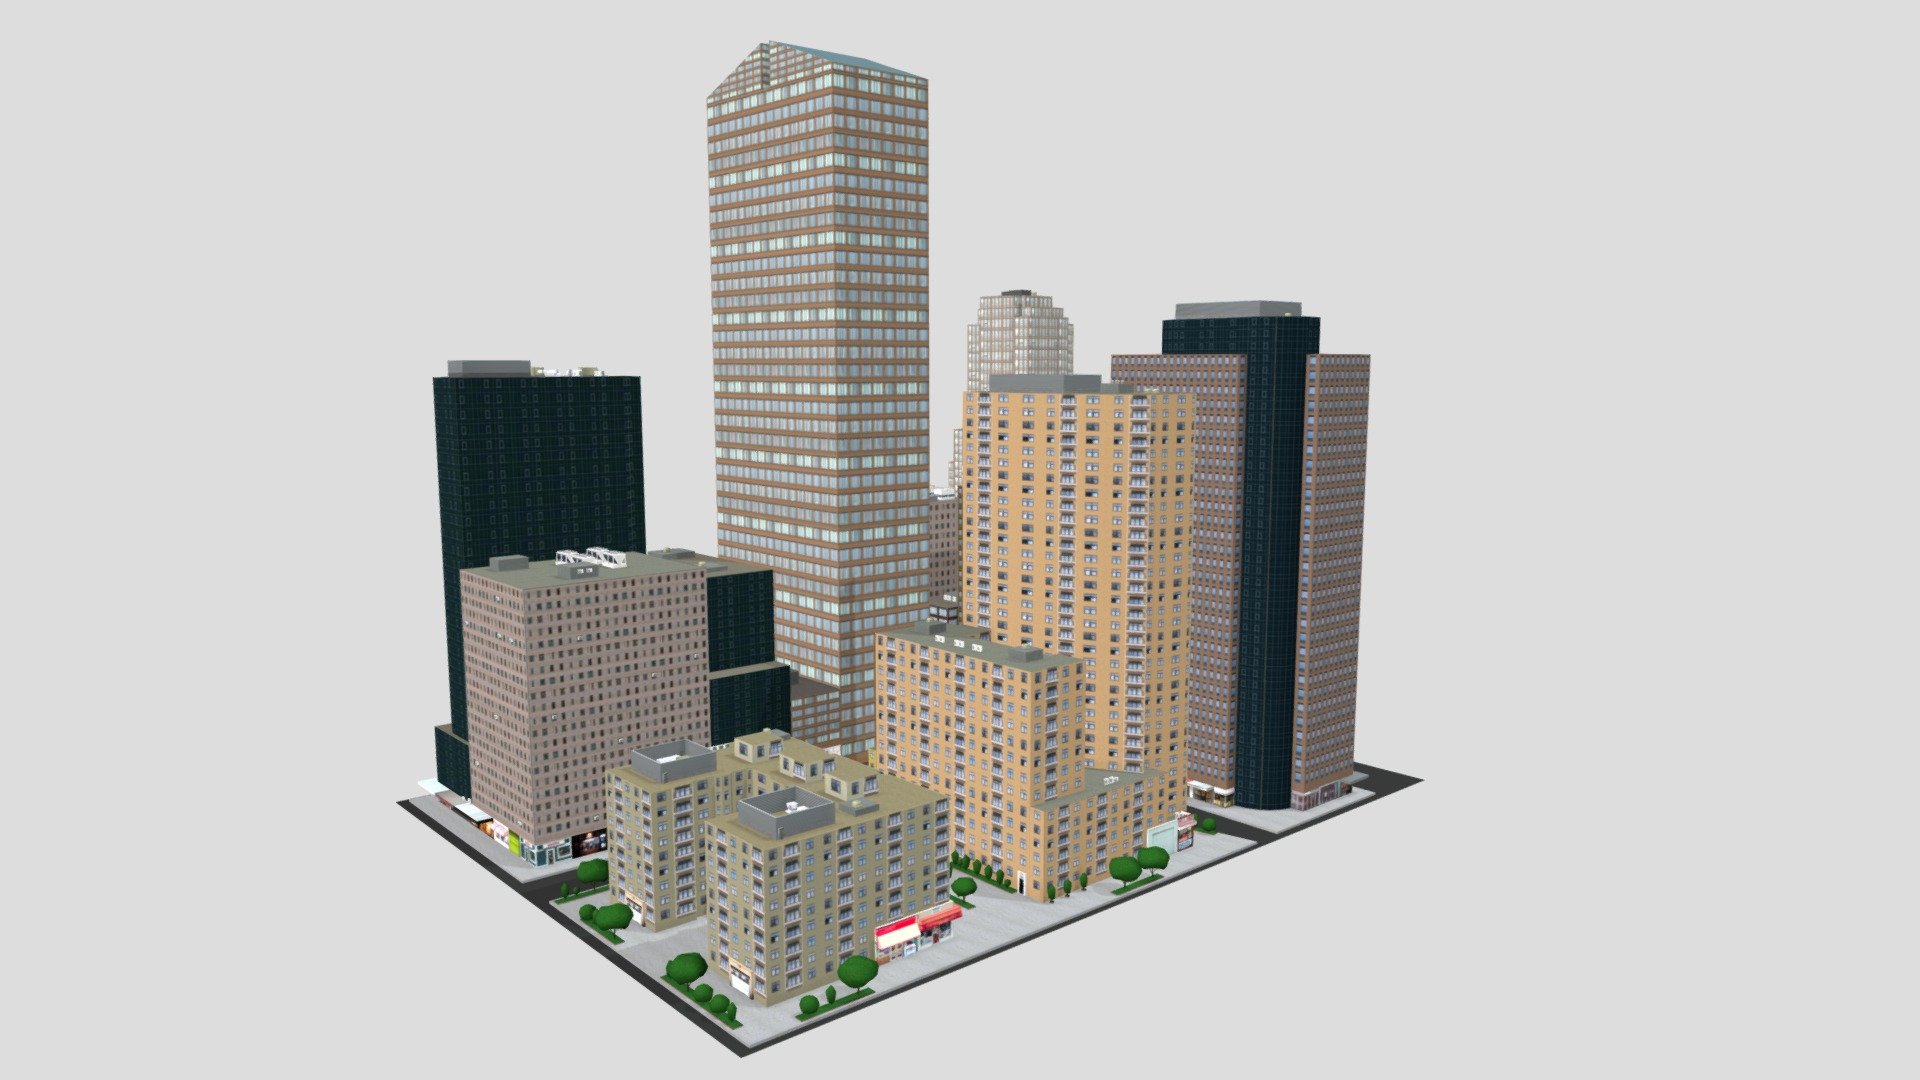 Low poly city block based on New York City ideal for game engines and VR.

Includes high-resolution color textures for Building facade, Shop-fronts, Trees, Footpath, and Roof air conditioning plant 3d model